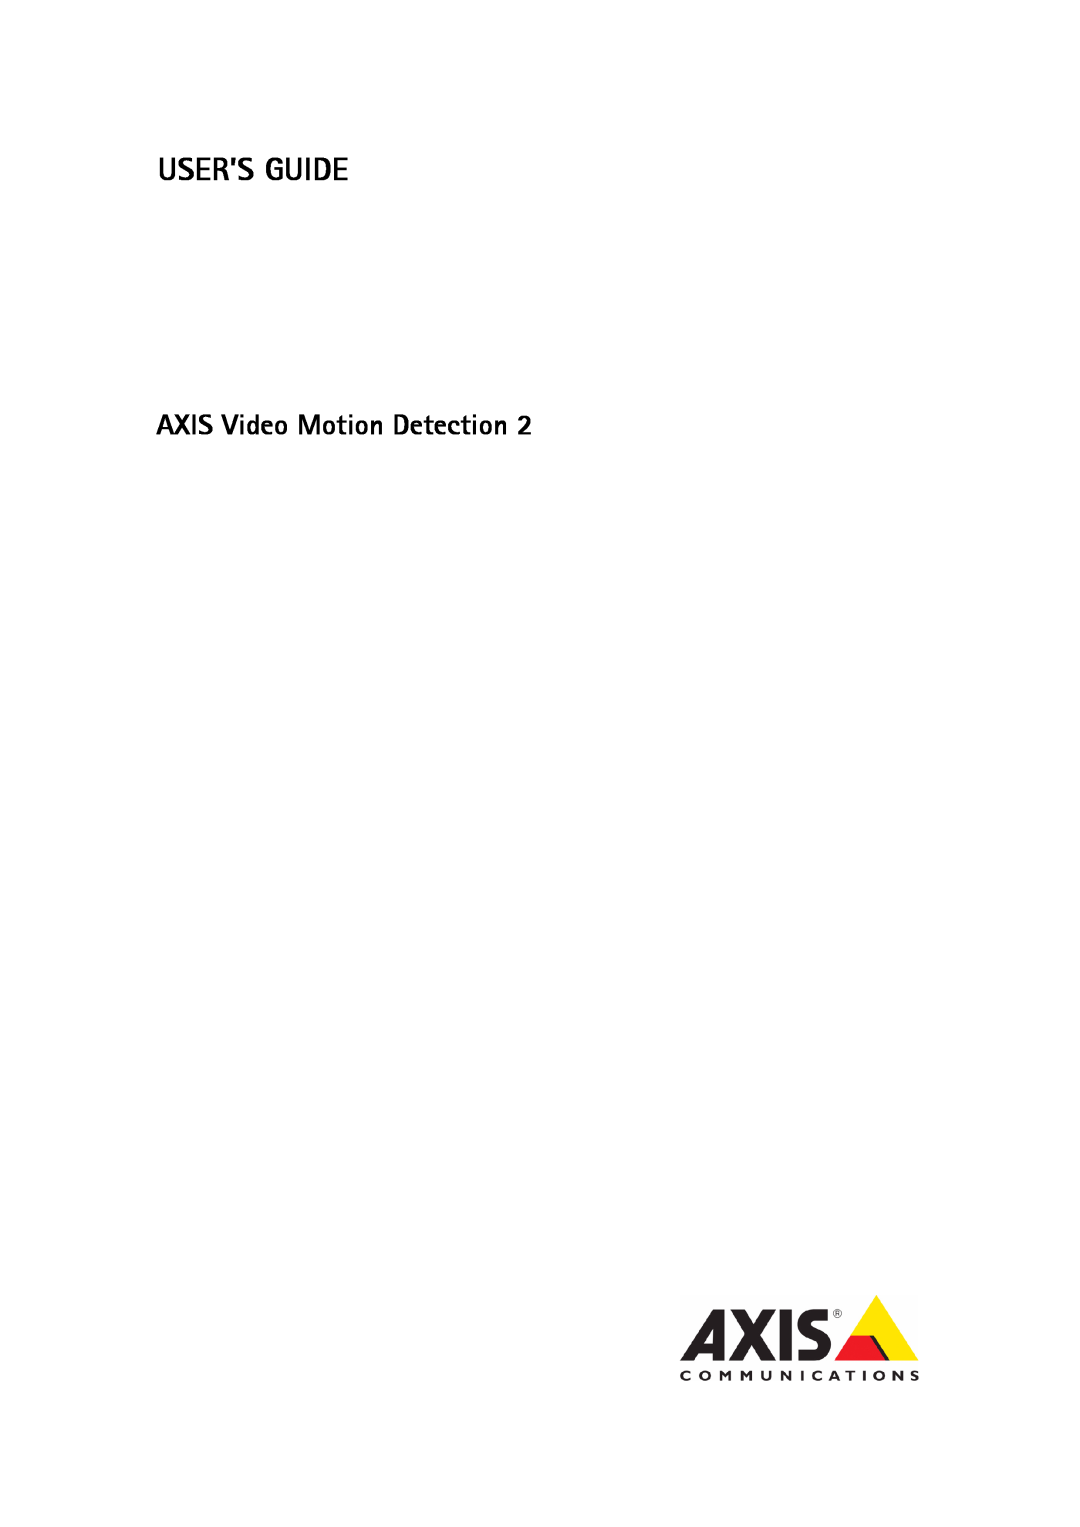 Axis Communications 2 manual User’S Guide, AXIS Video Motion Detection 